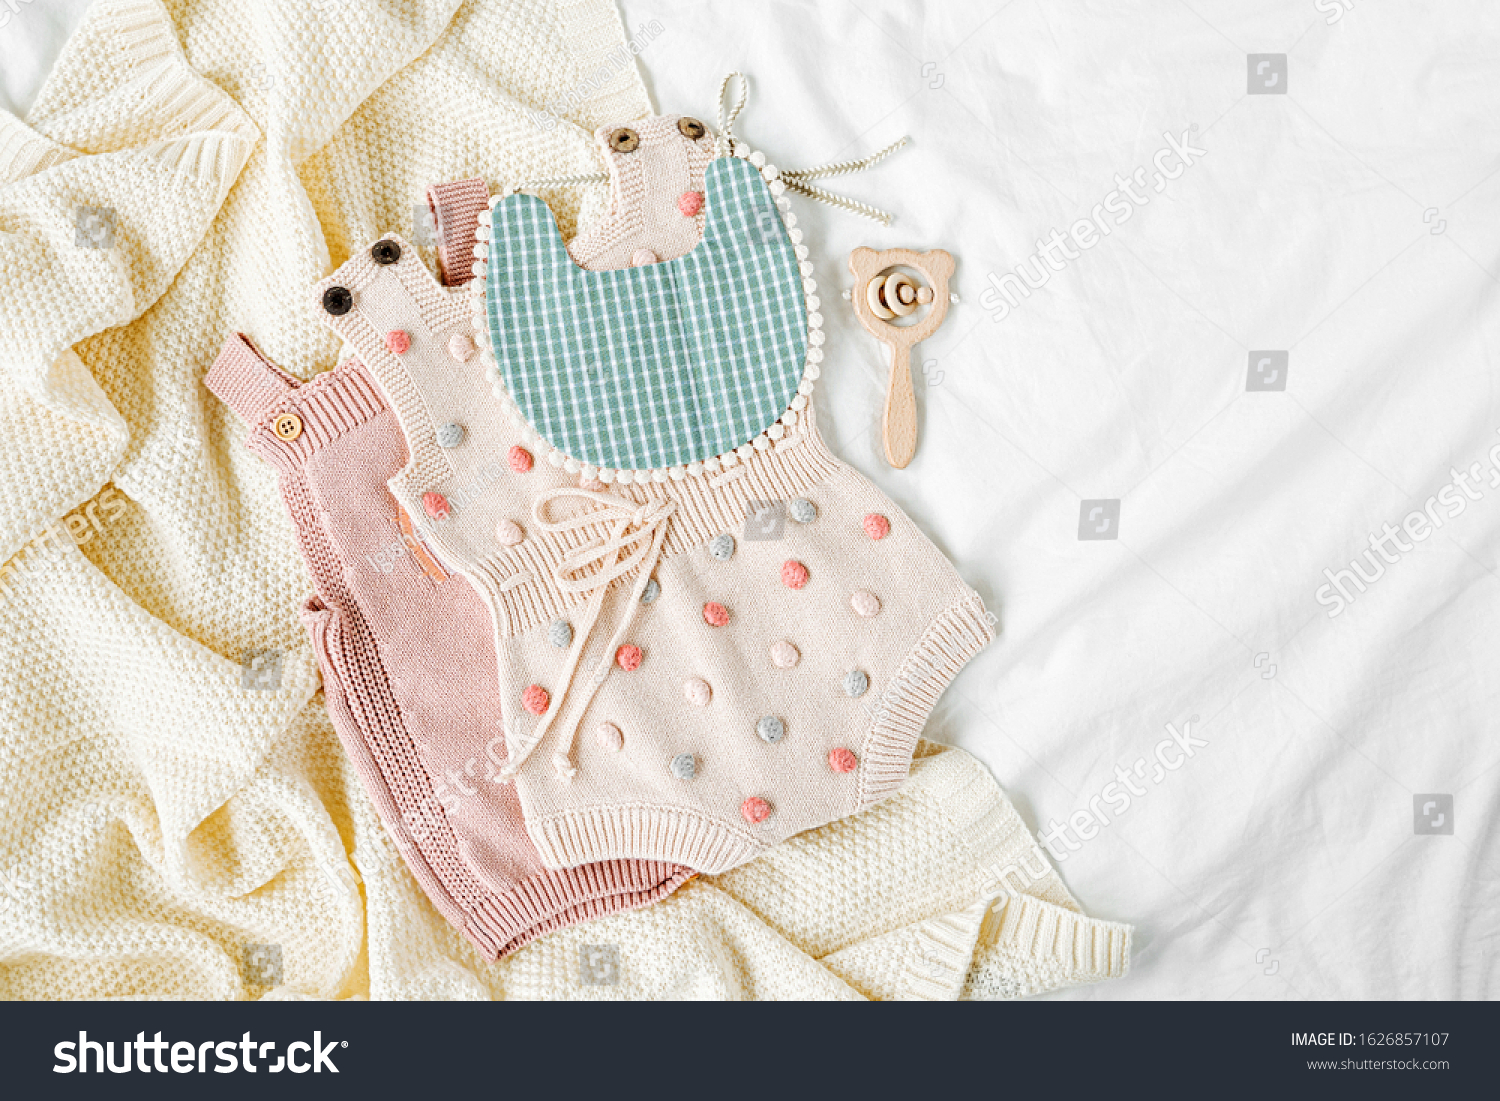 Pink bodysuit and  bib on knitted blanket. Set of  kids clothes and accessories  on bed. Fashion newborn. Flat lay, top view #1626857107